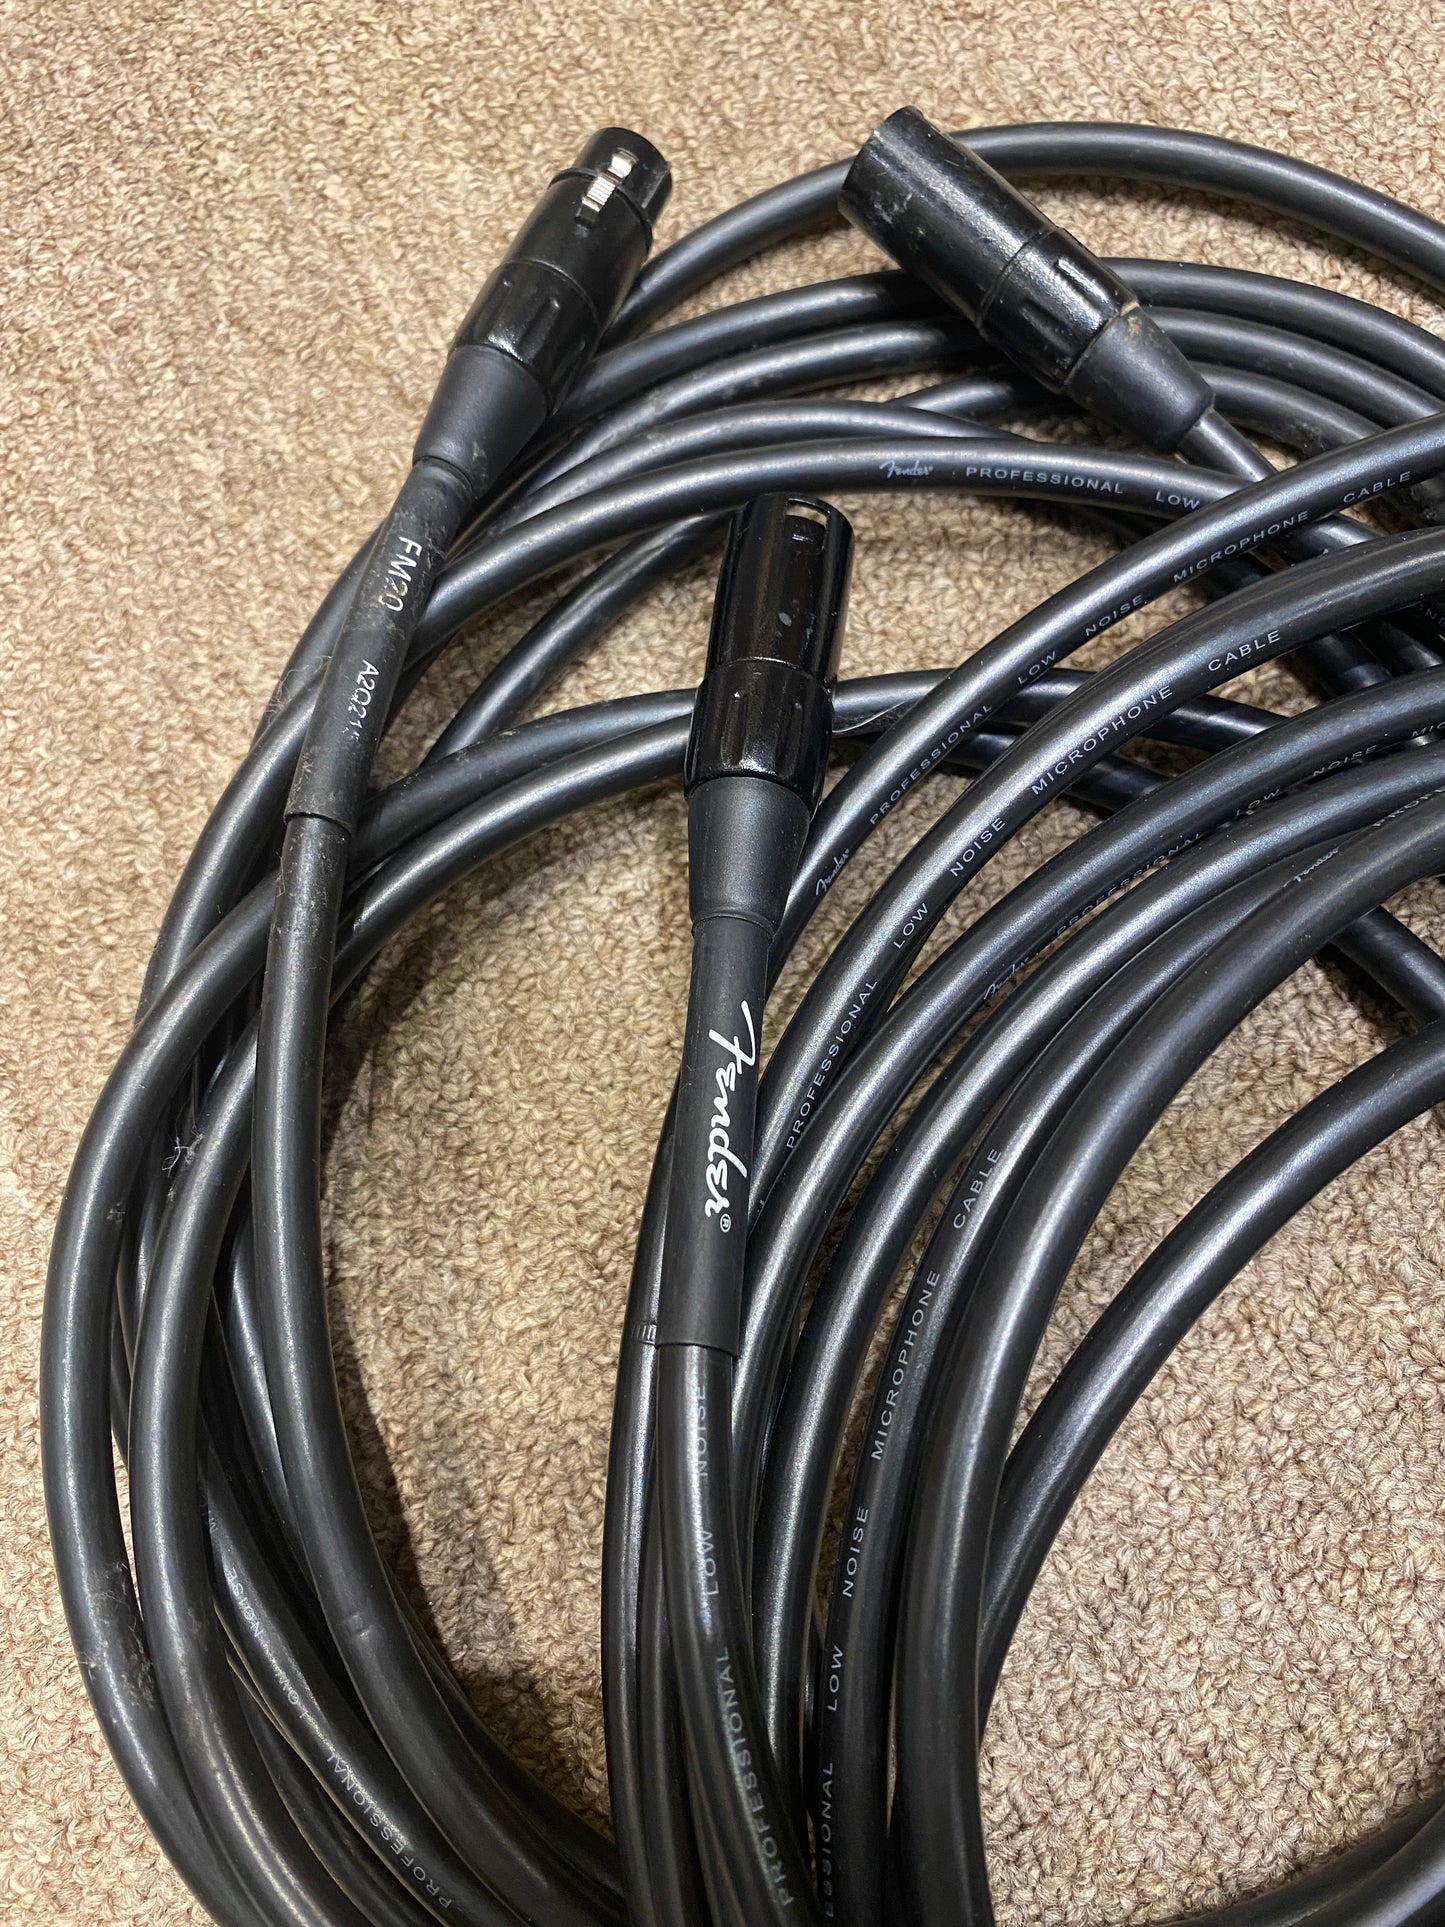 Fender Performance Series 20' Microphone Cable - Open Box 2 for 1